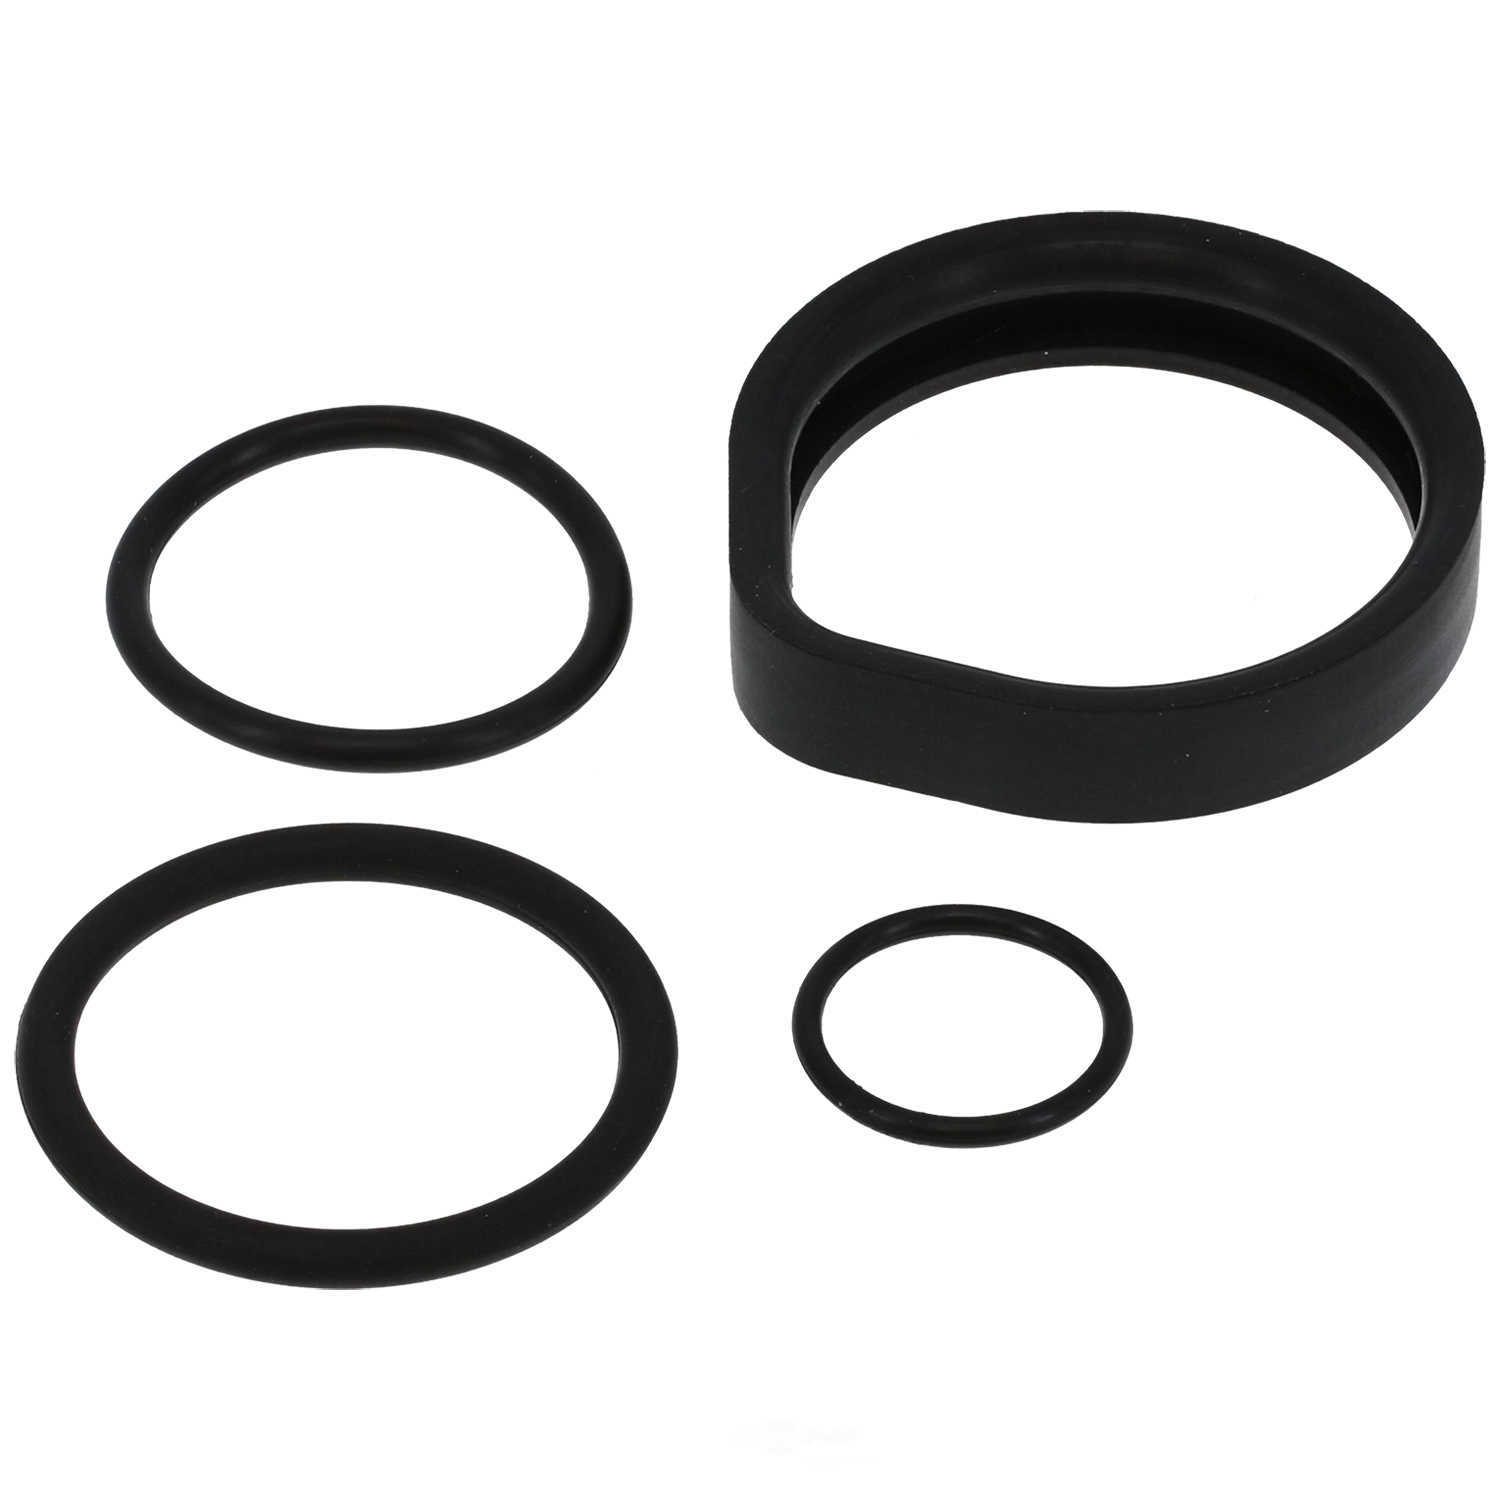 GB REMANUFACTURING INC. - Fuel Injector Seal Kit - GBR 8-020